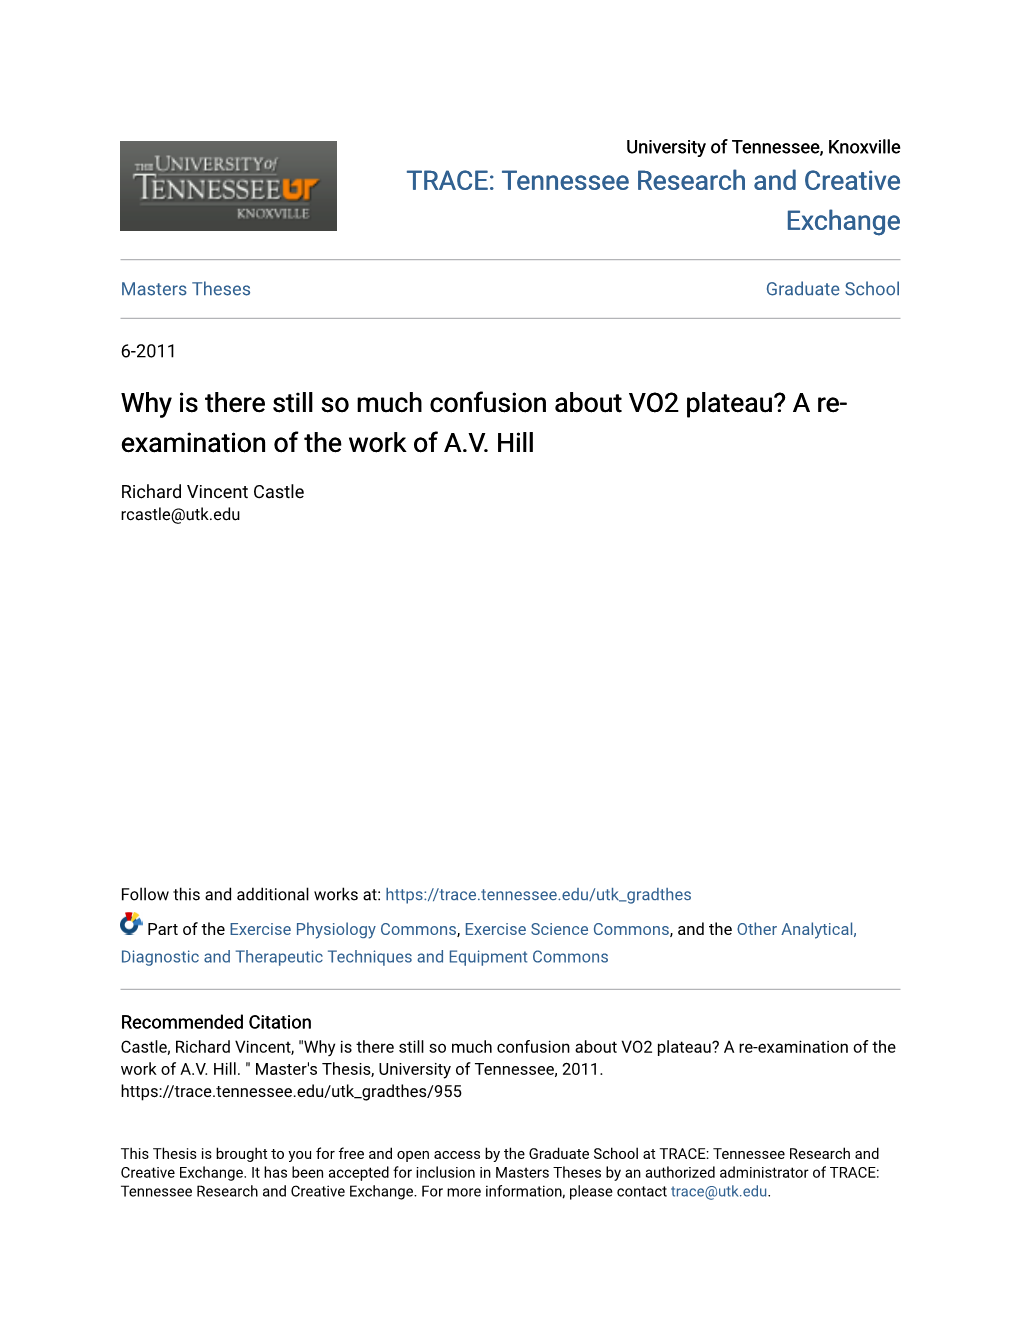 Why Is There Still So Much Confusion About VO2 Plateau? a Re- Examination of the Work of A.V